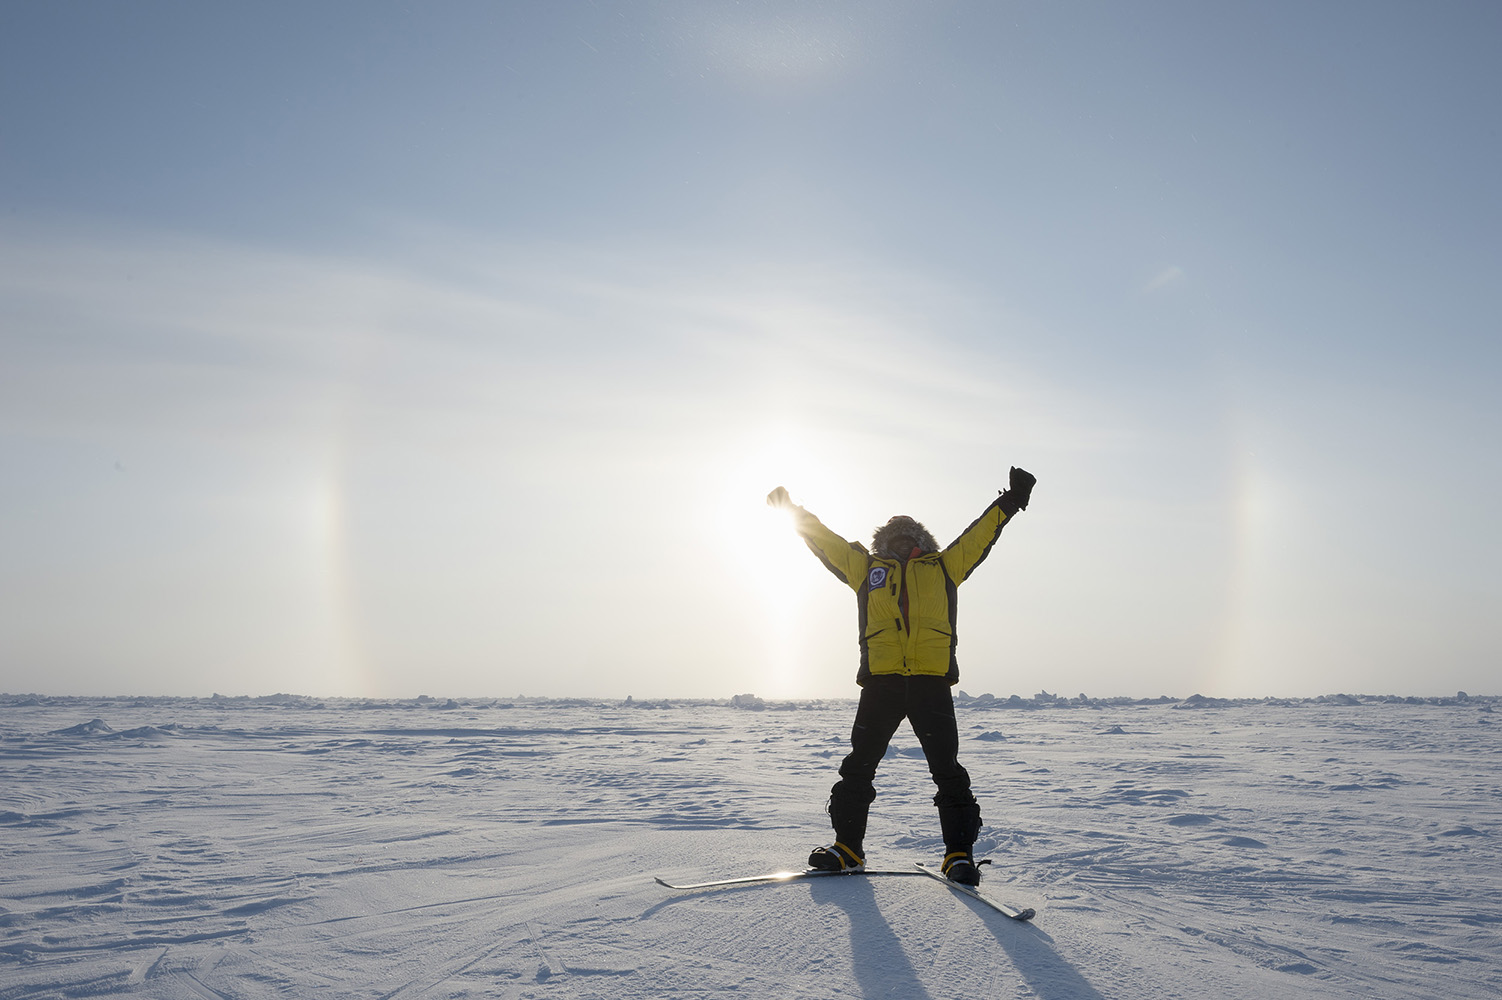 Renny reaching the North Pole, with a sun halo in the background